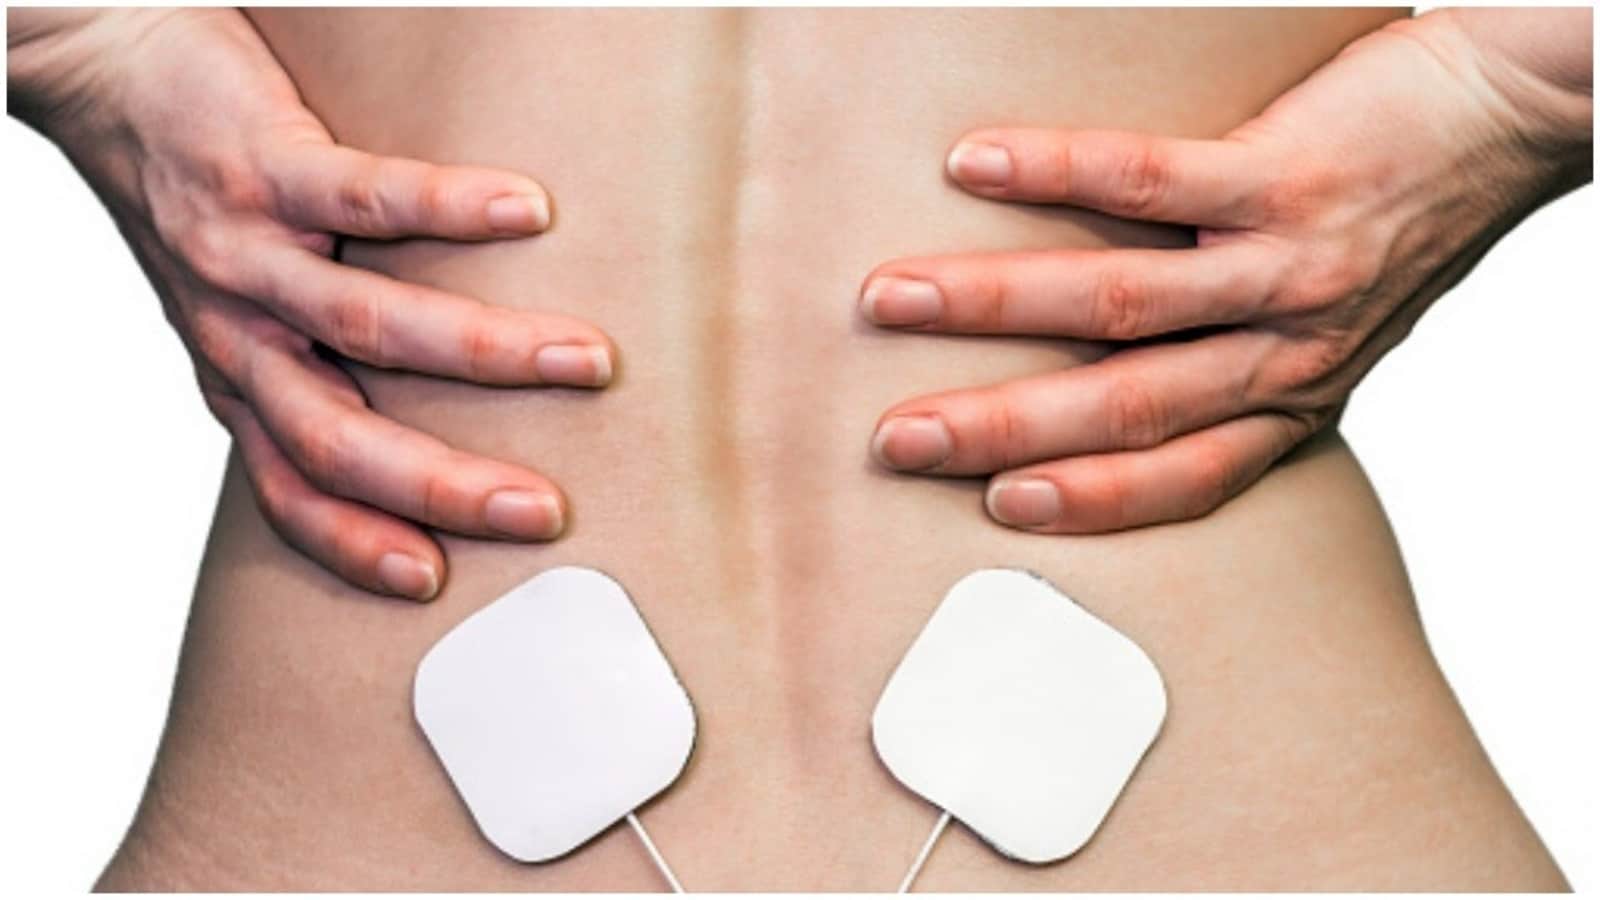 Radiofrequency spinal cord stimulation shows improved longer-lasting pain relief: Study